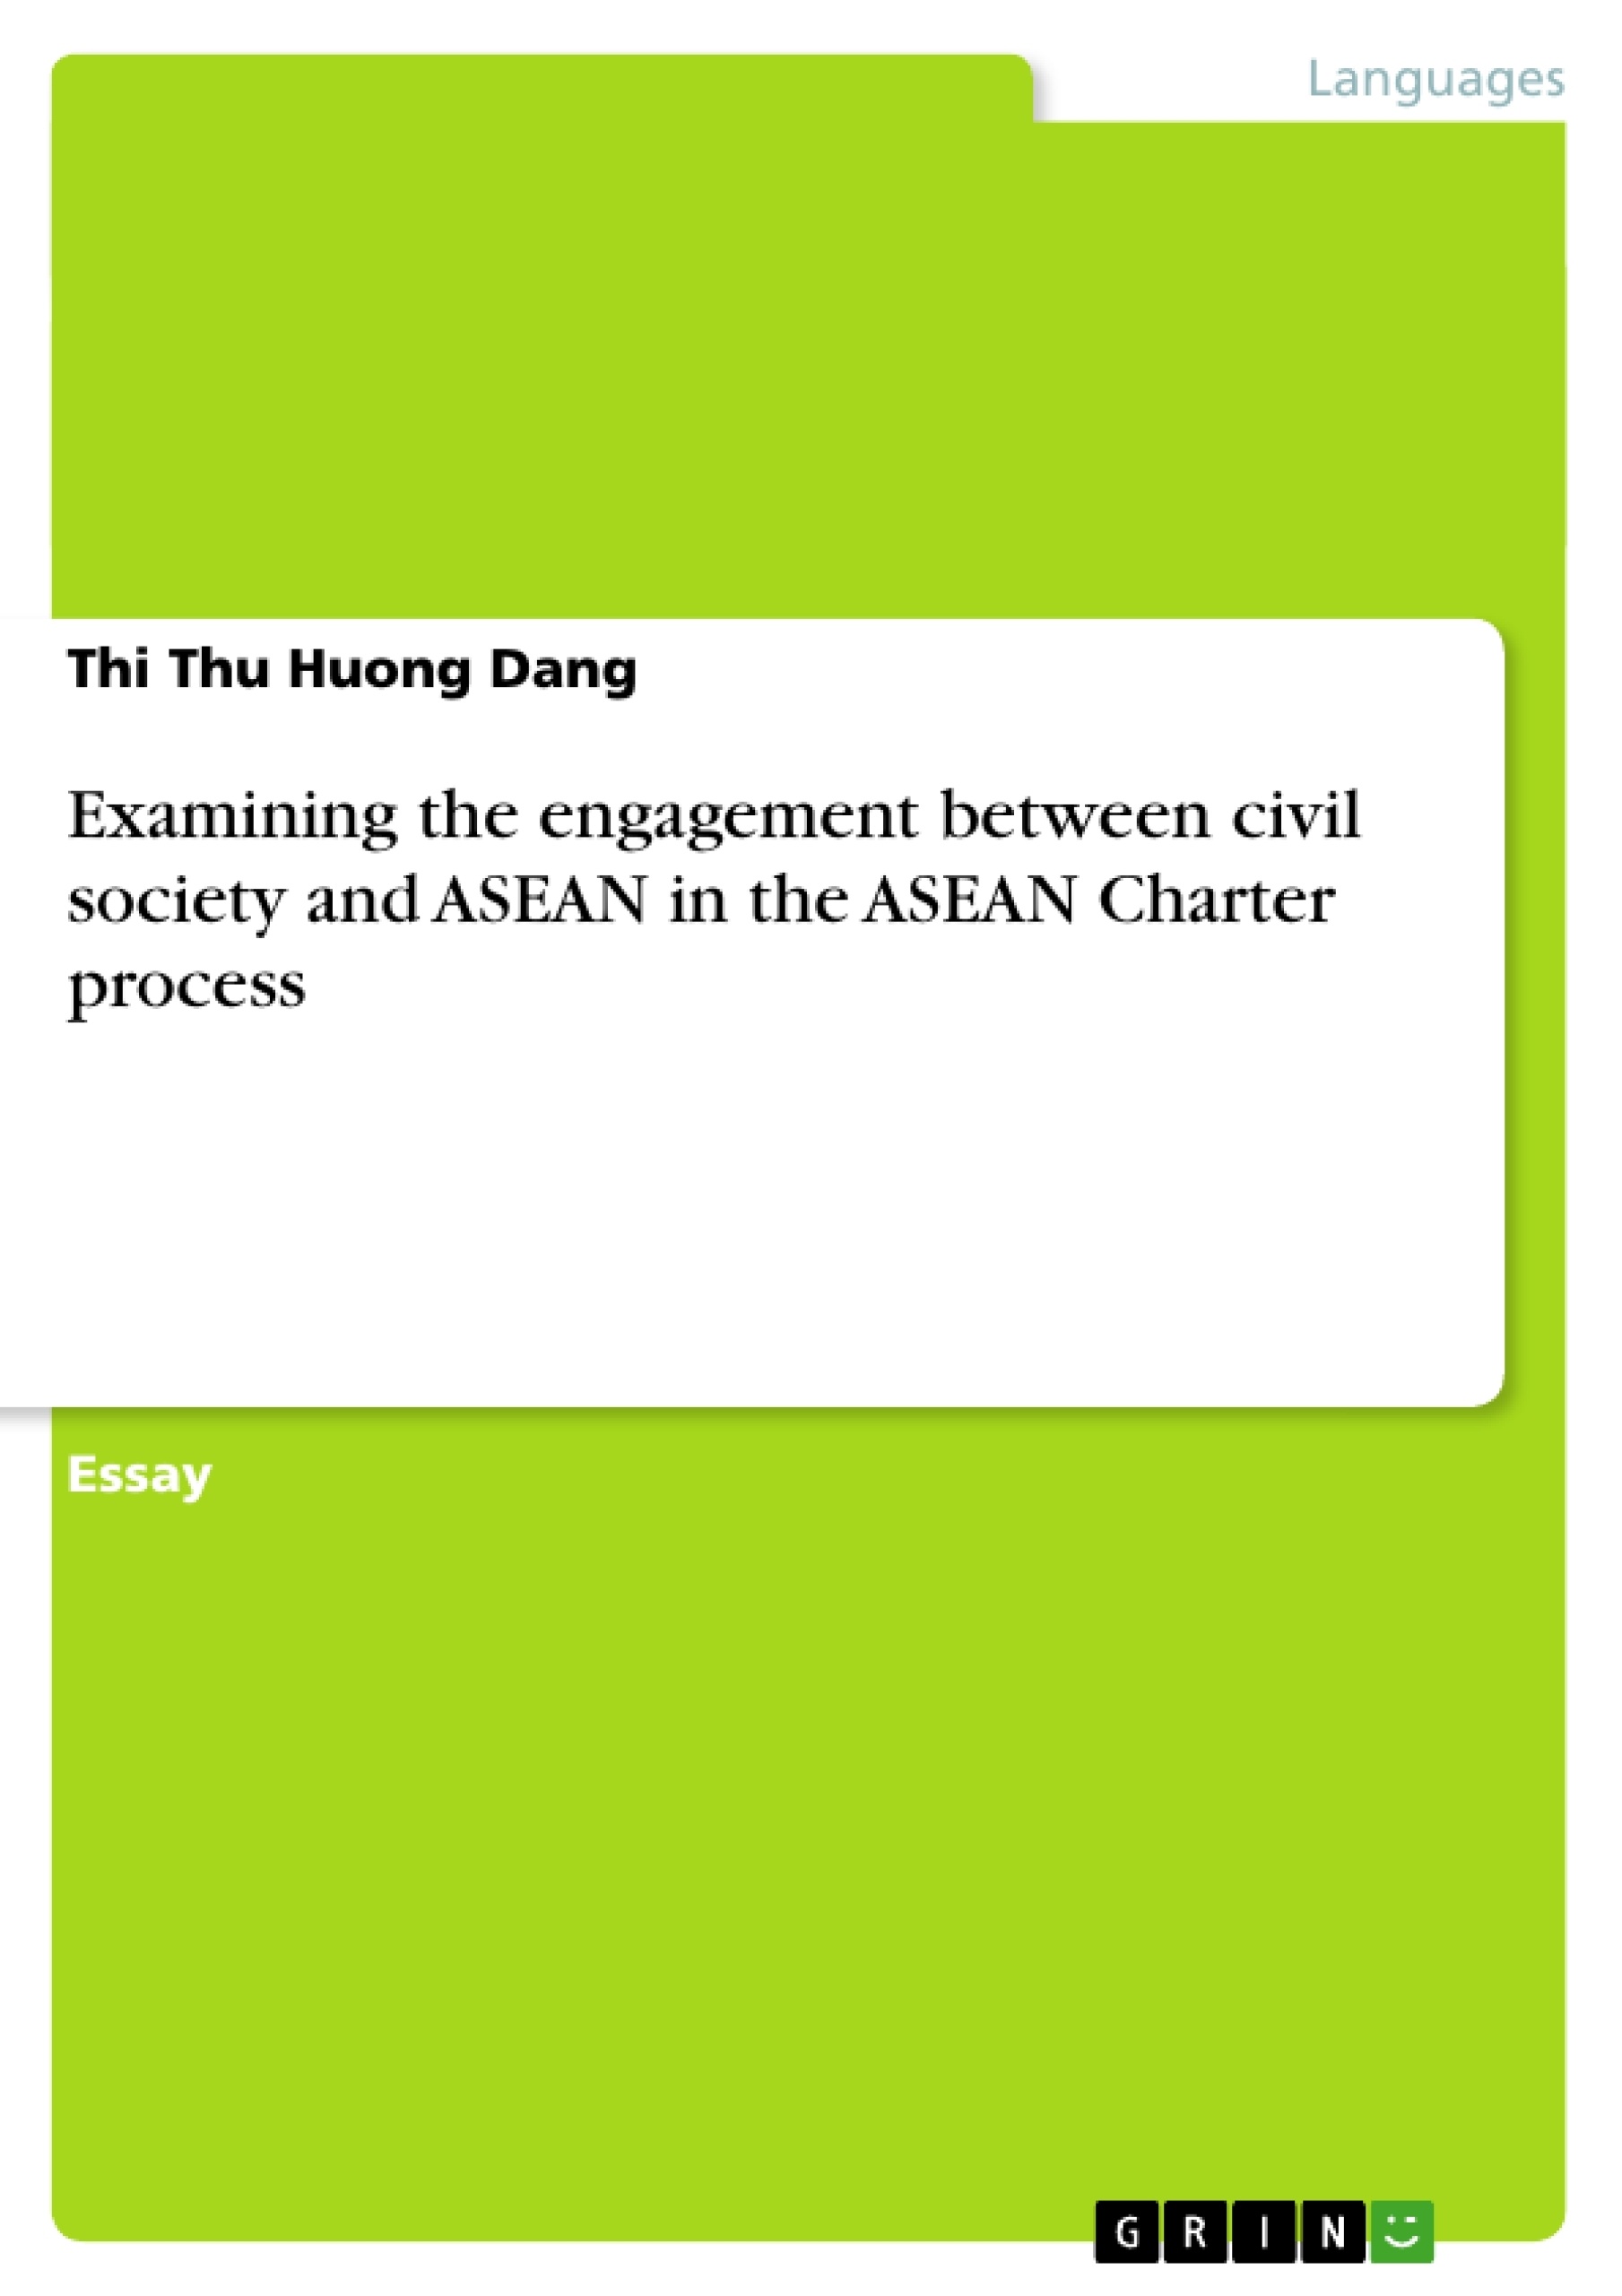 Titre: Examining the engagement between civil society and ASEAN in the ASEAN Charter process